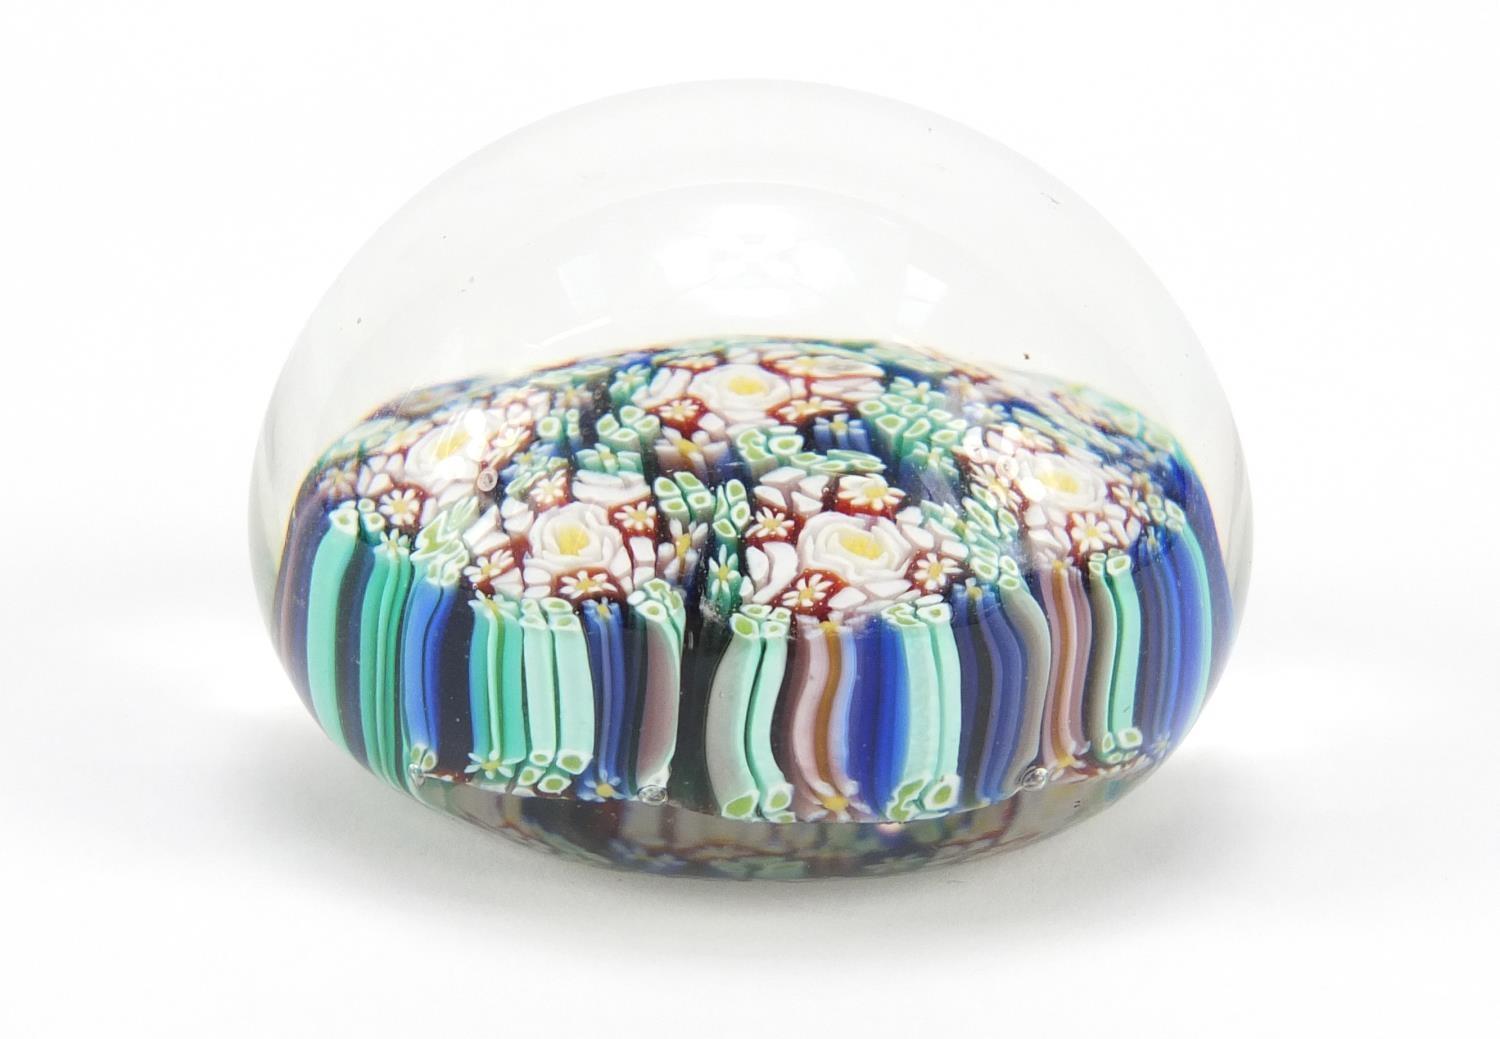 Millefiori glass paperweight, 5cm in diameter : For Further Condition Reports Please Visit Our